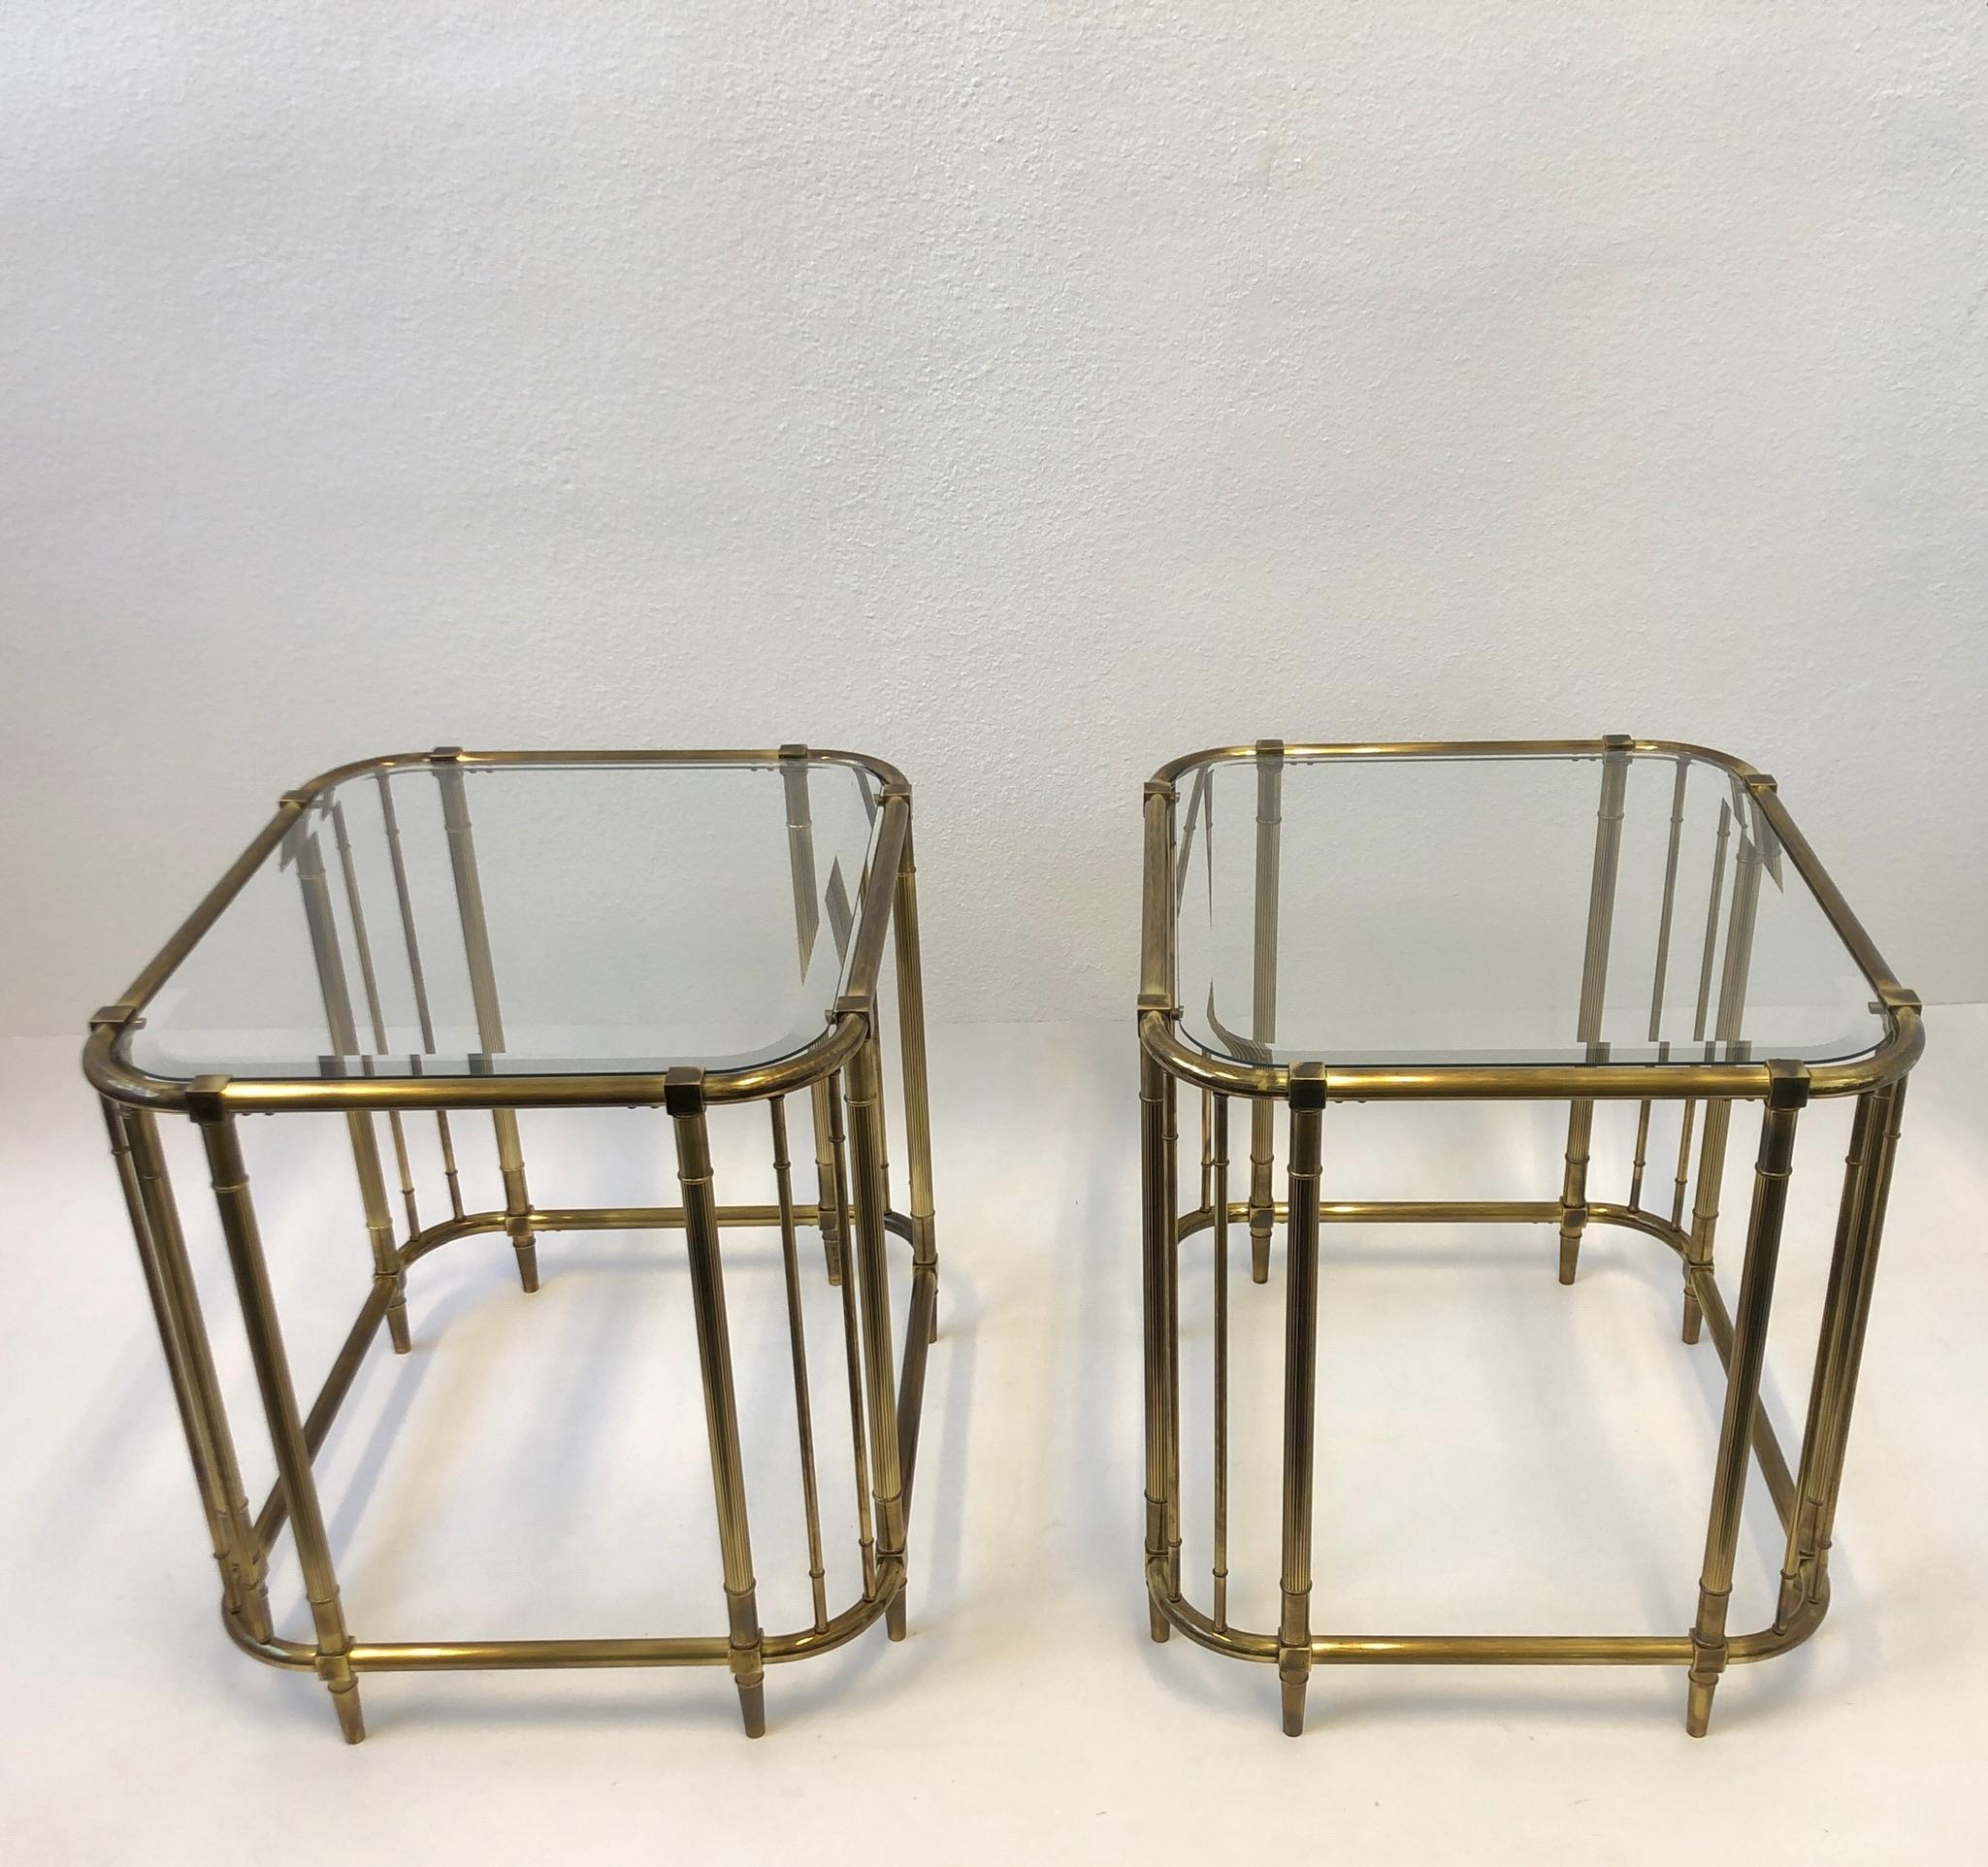 American Pair of Aged Brass and Glass Side Tables by Mastercraft